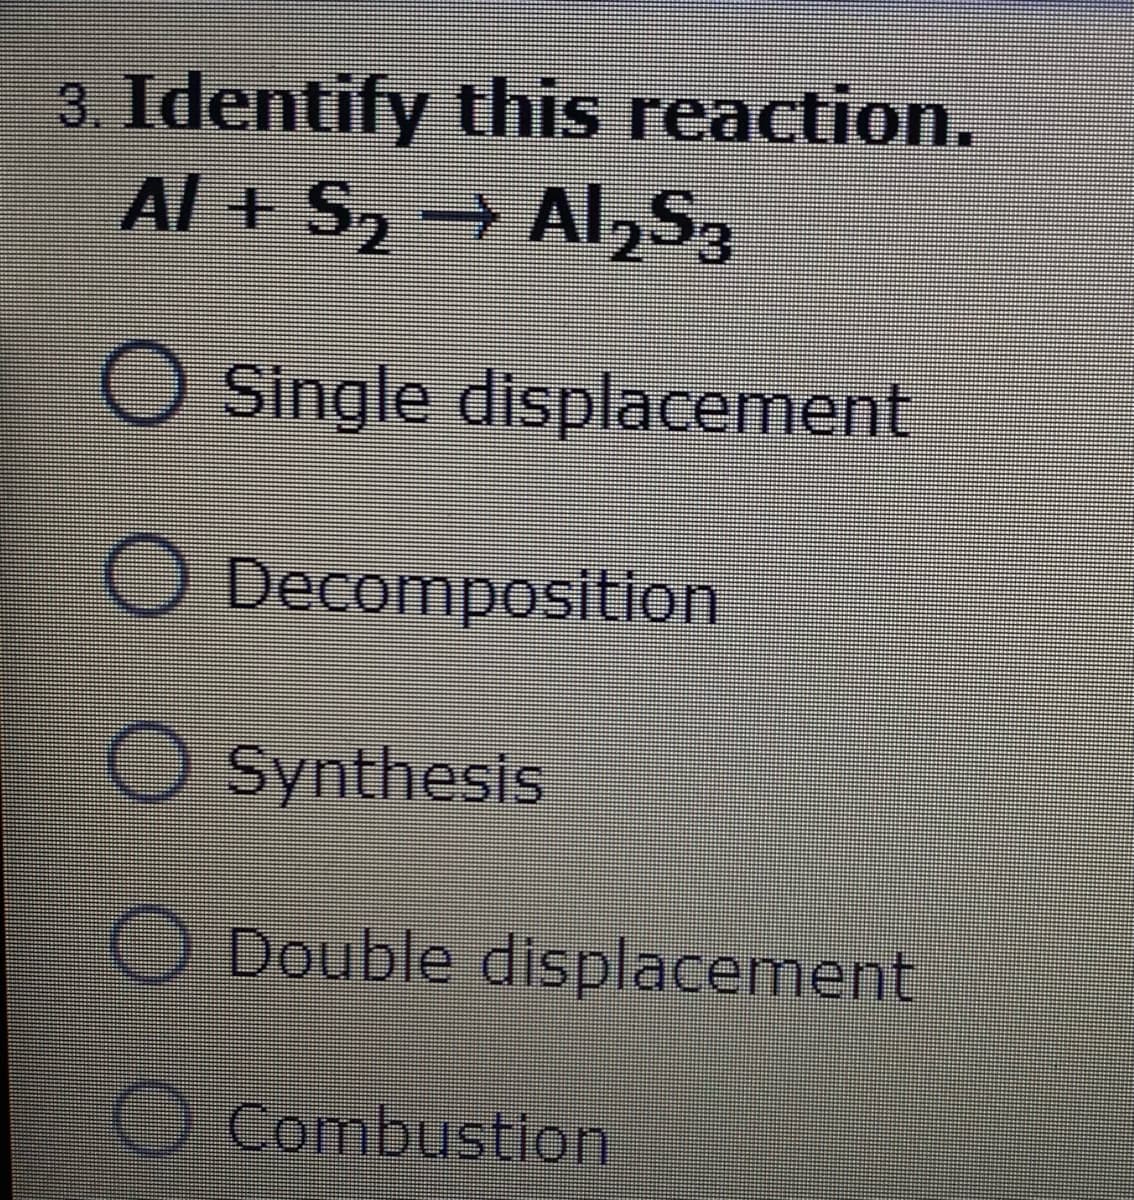 3. Identify this reaction.
Al + S2 Al2S3
O Single displacement
O Decomposition
O Synthesis
O Double displacement
O Combustion
